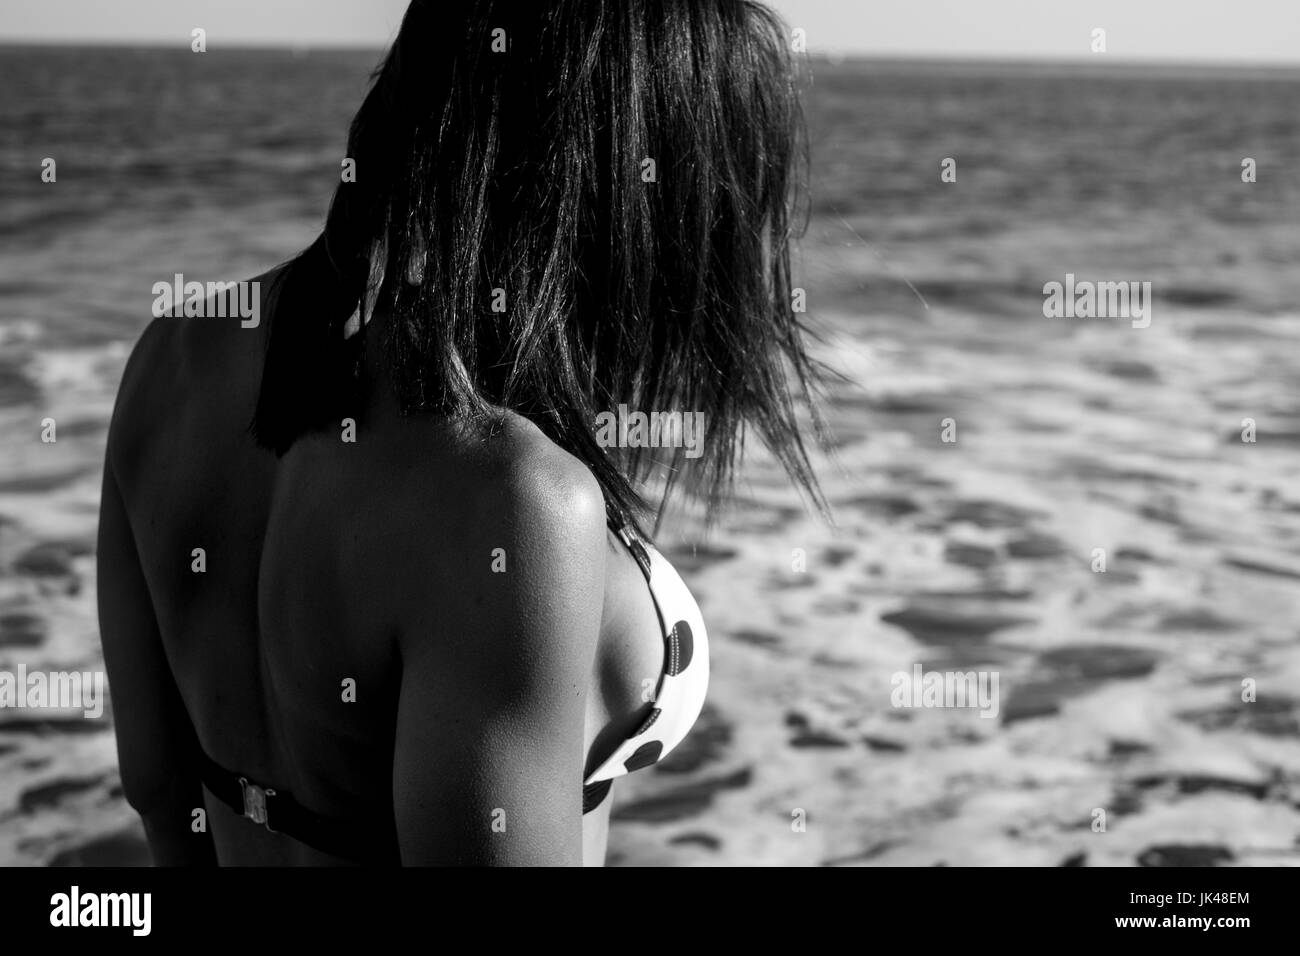 Bikini beach Black and White Stock Photos and Images picture